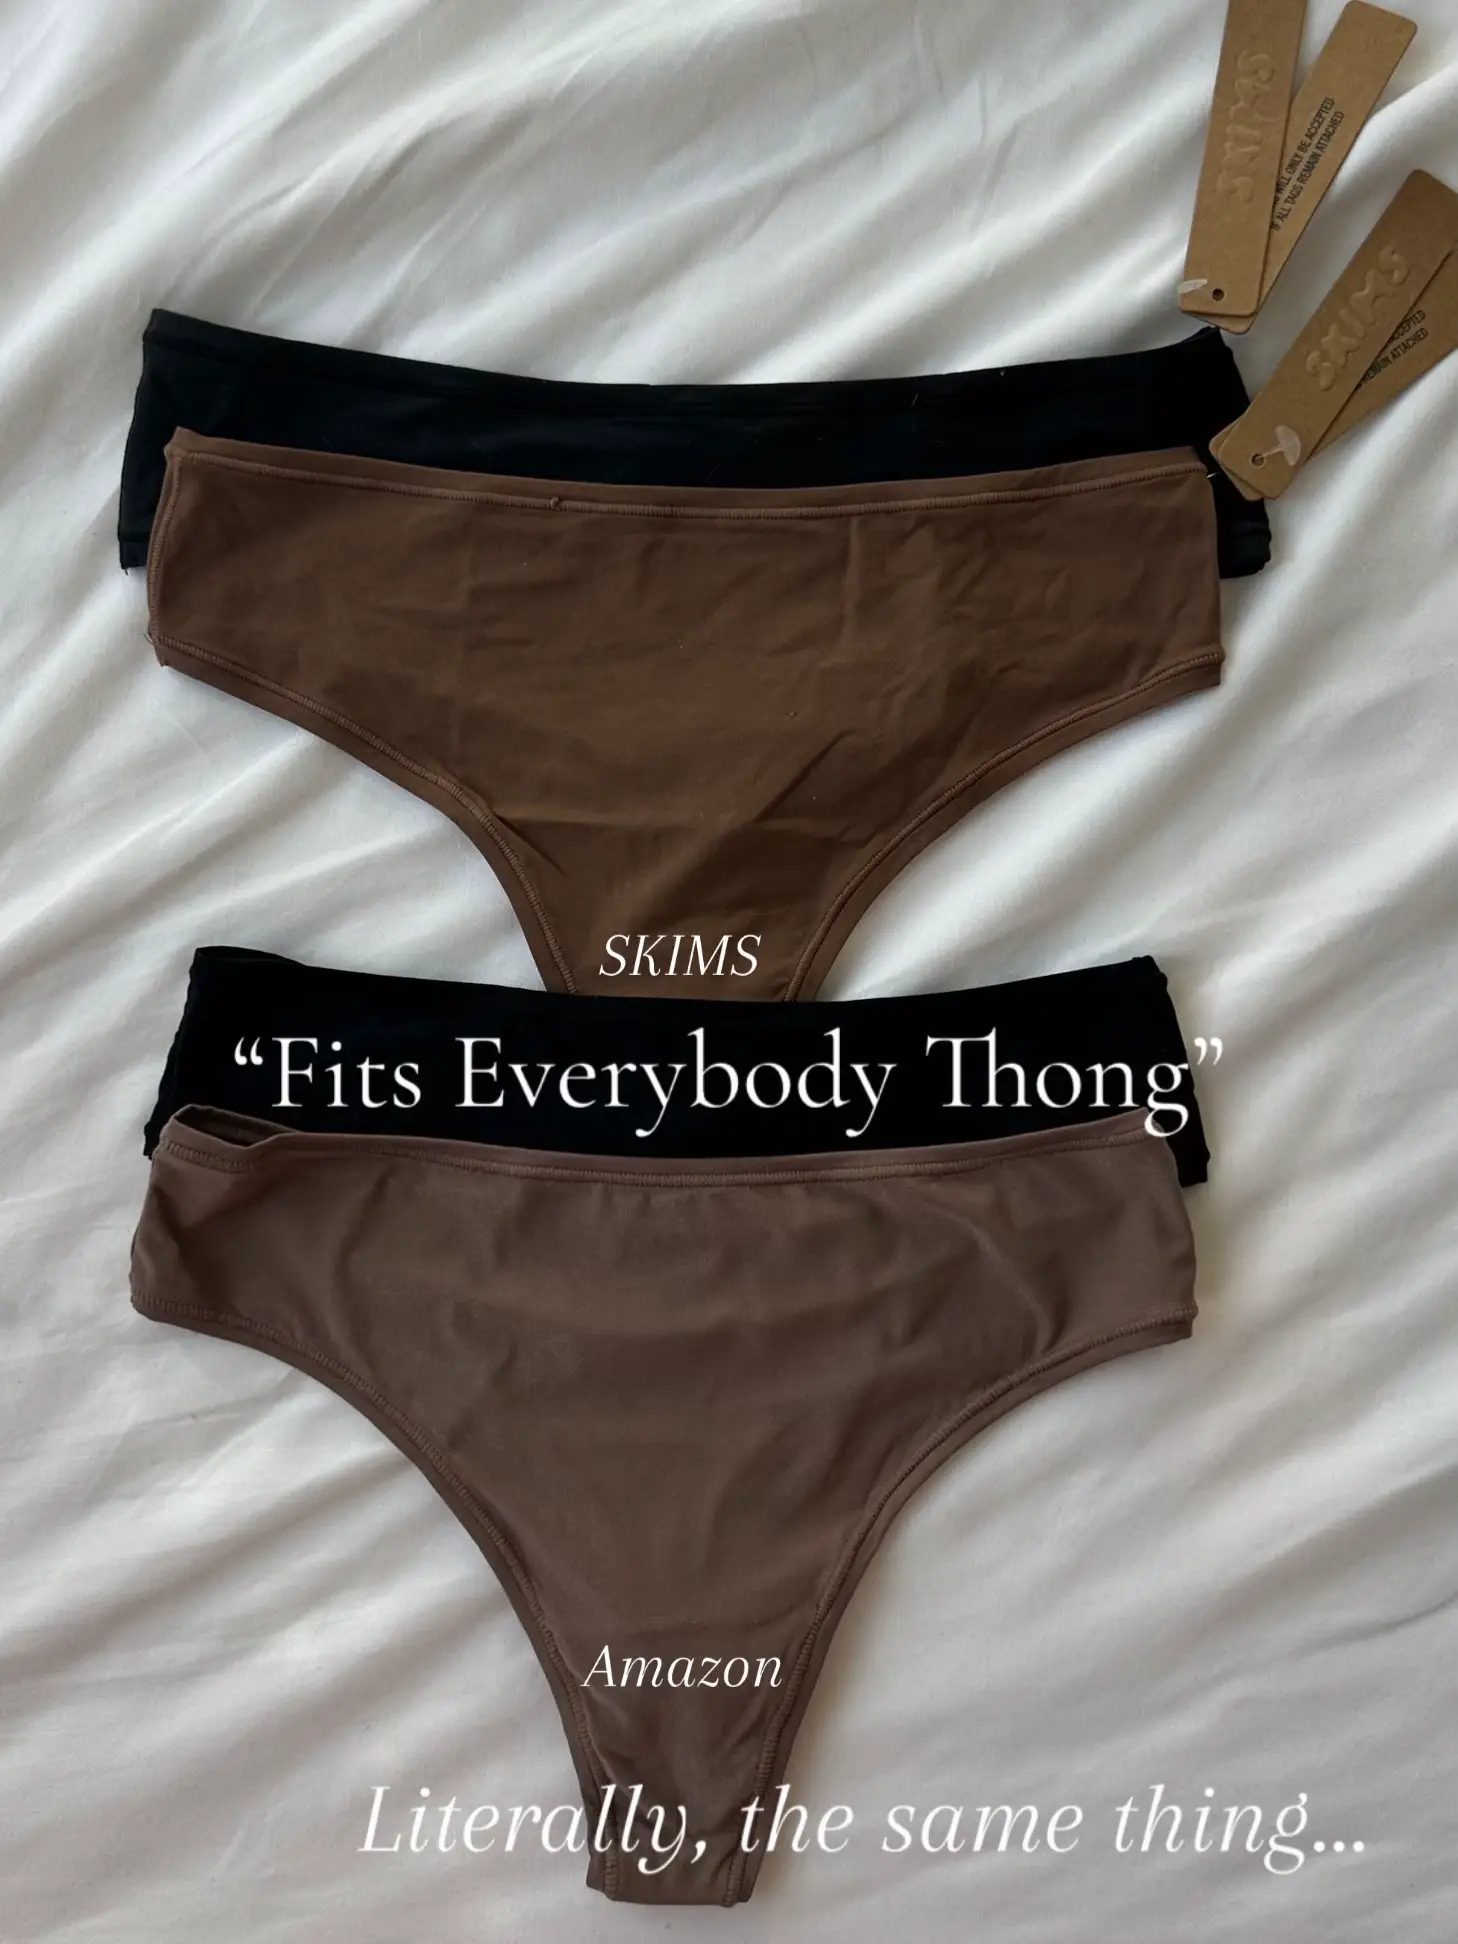 Skims Cotton Dipped Thong in Mineral, Kim Kardashian Launches Cotton Skims  Collection, and TBH, It Looks a Lot Like Her Everyday Clothes